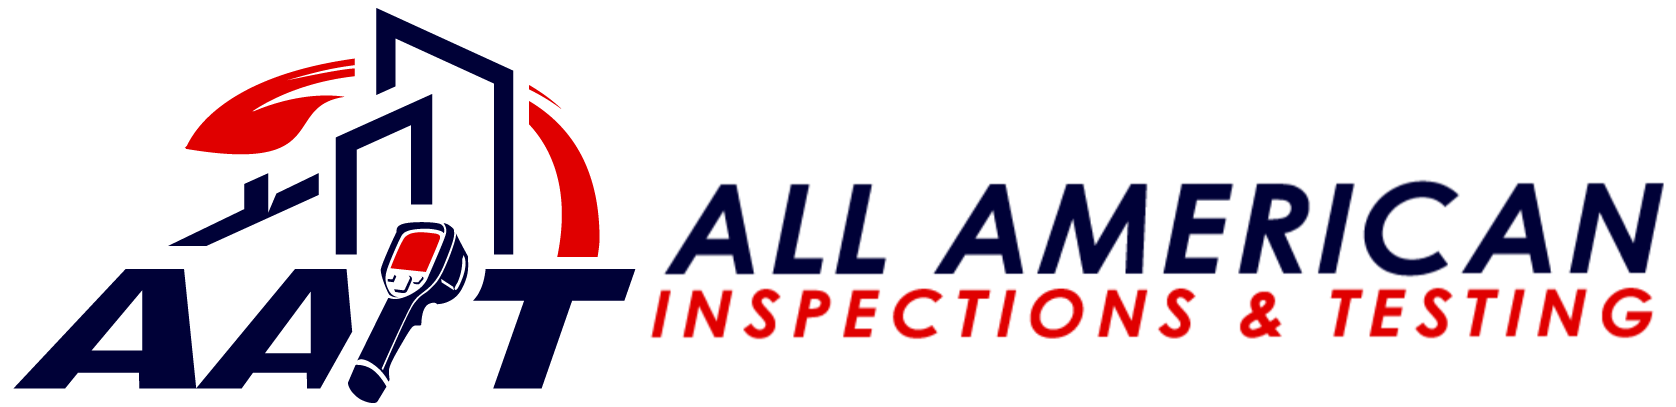 A black background with red and blue text that says " all about inspections ".